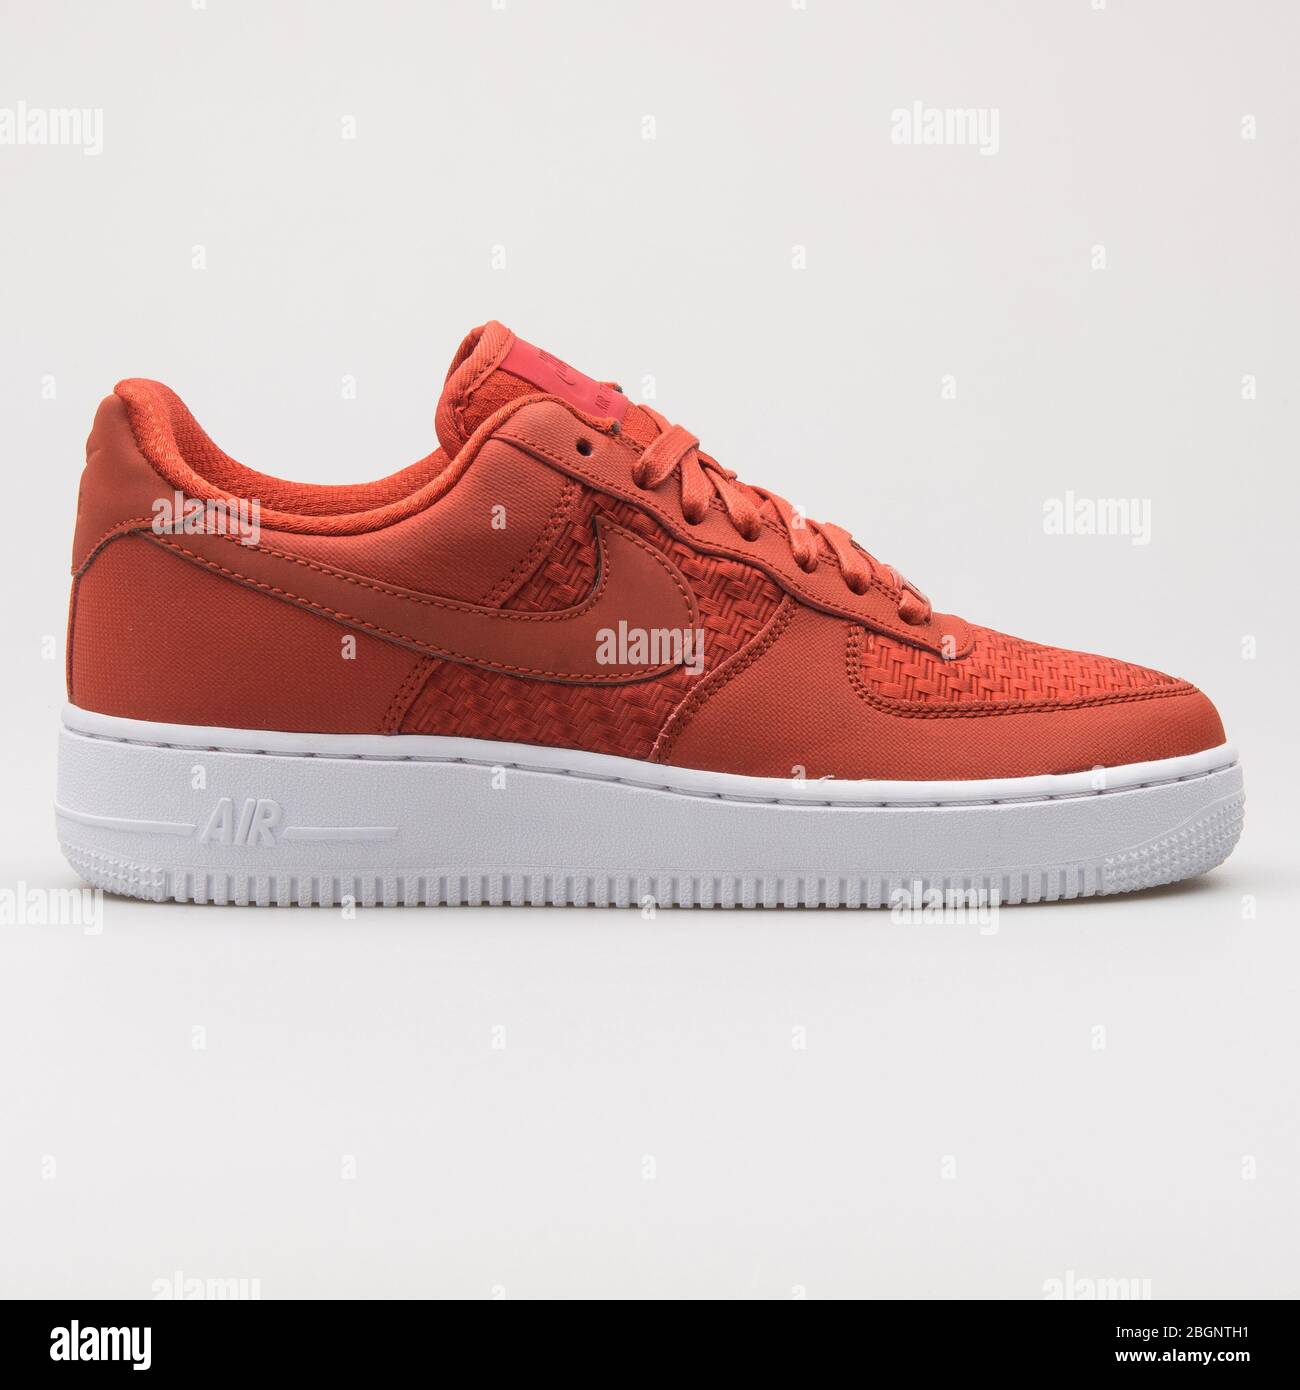 VIENNA, AUSTRIA - AUGUST 7, 2017: Nike Air Force 1 white and red sneaker on  white background Stock Photo - Alamy